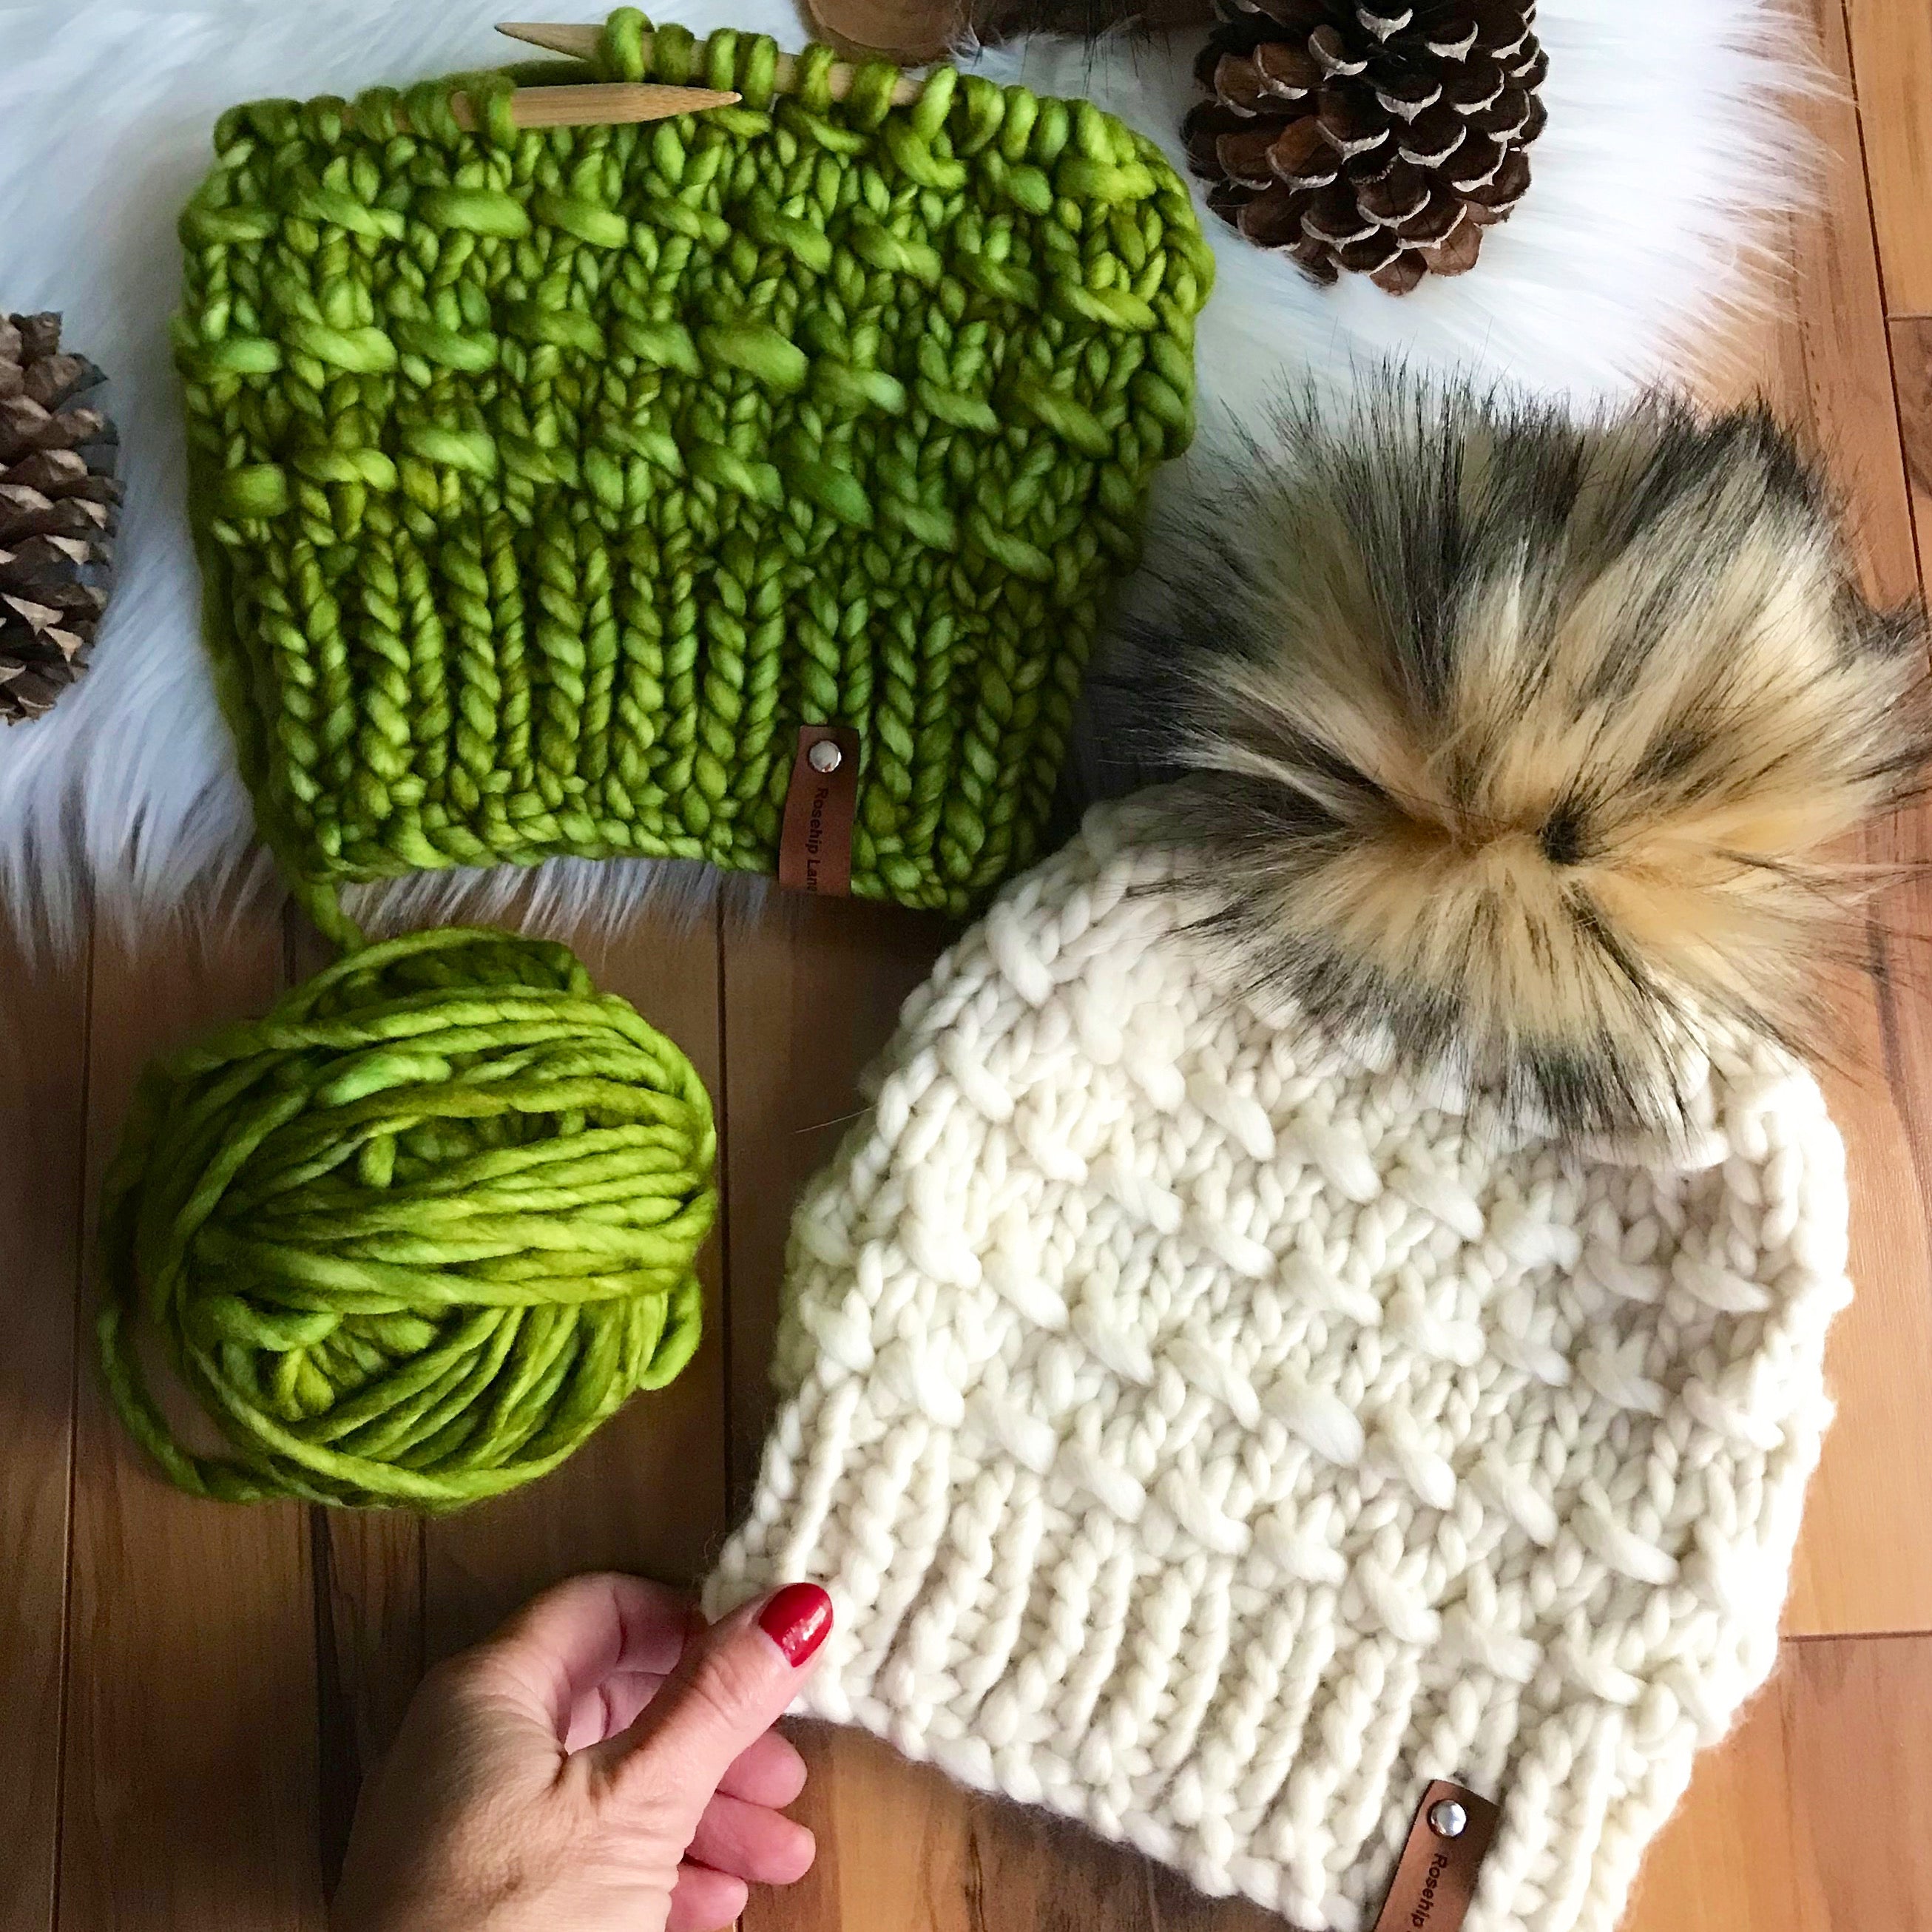 Winter Style with Rella's Pom Beanie